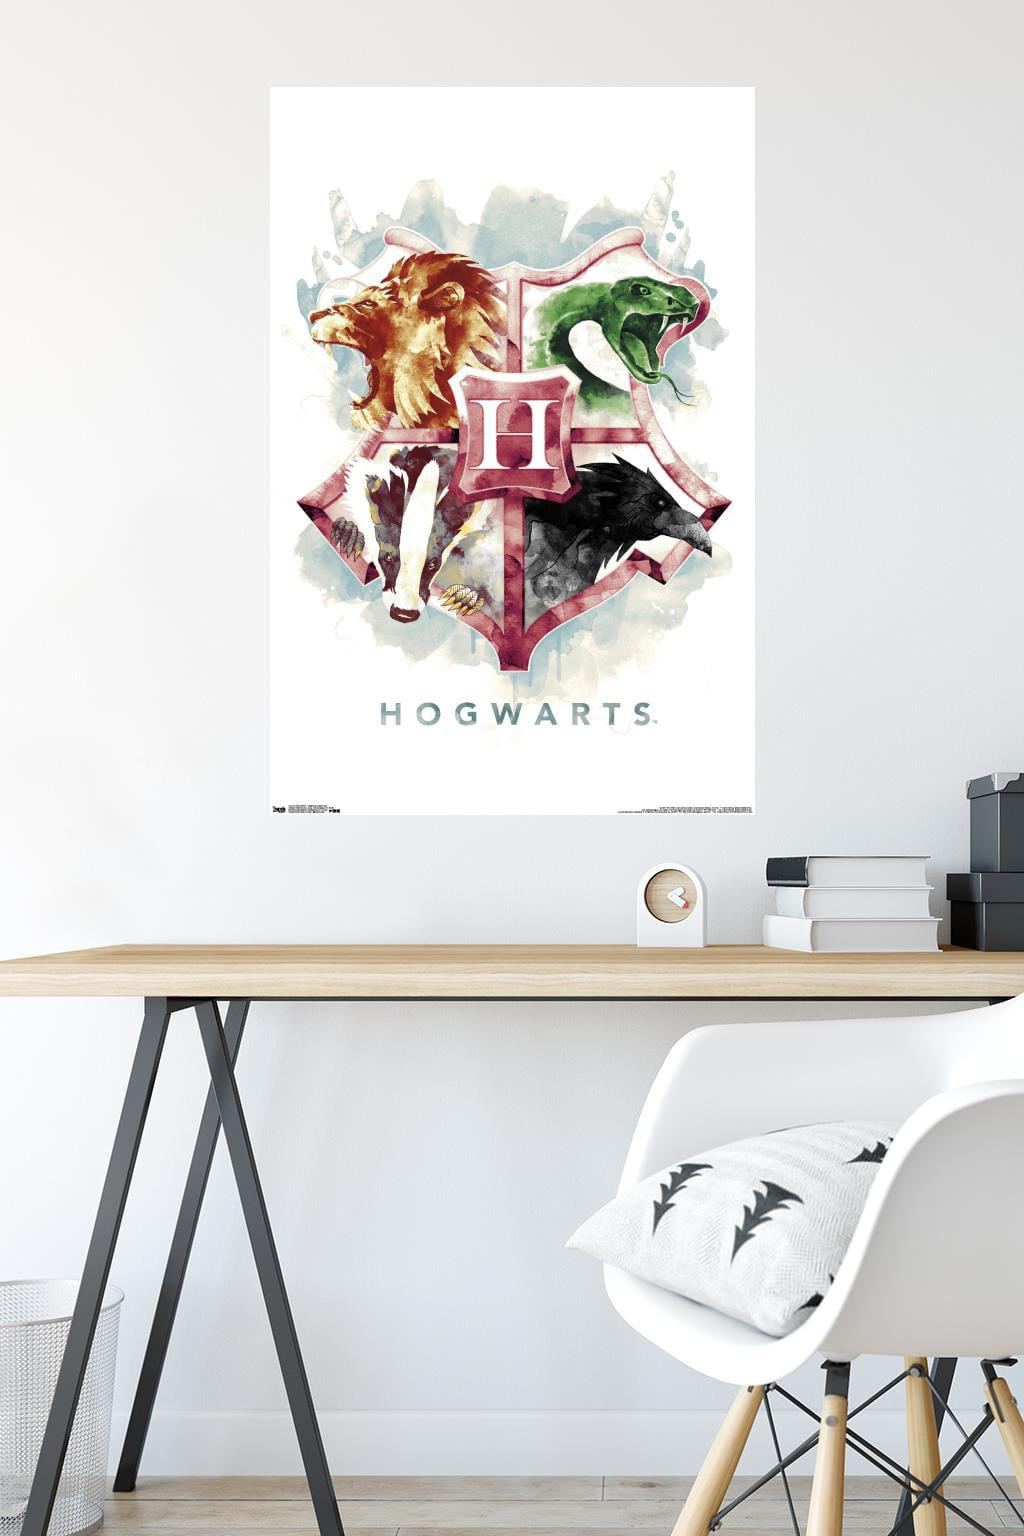  Harry Potter Hogwarts Crest Poster (24in x 36in)  (Multicolored): Posters & Prints